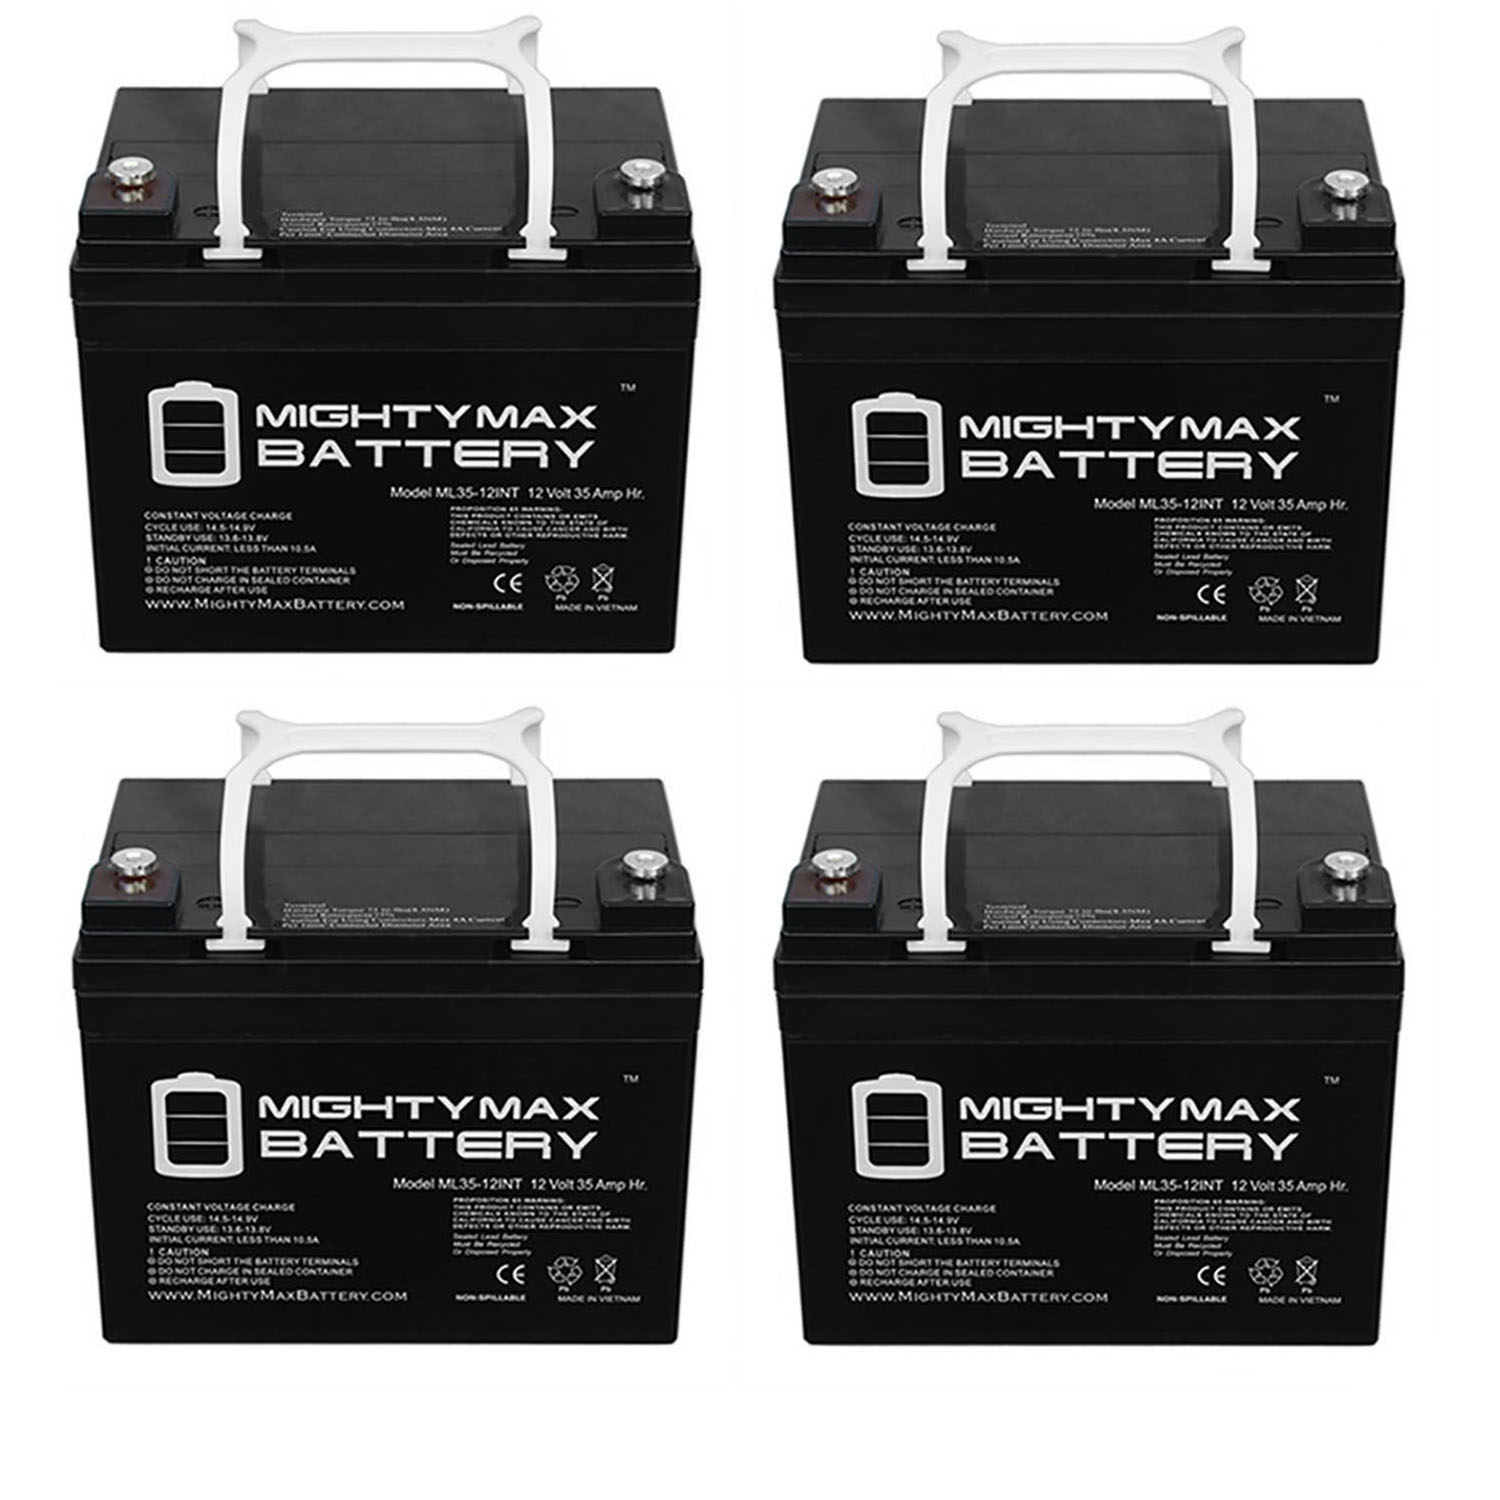 12V 35AH INT Replacement Battery for Cub Cadet 182 - 4 Pack